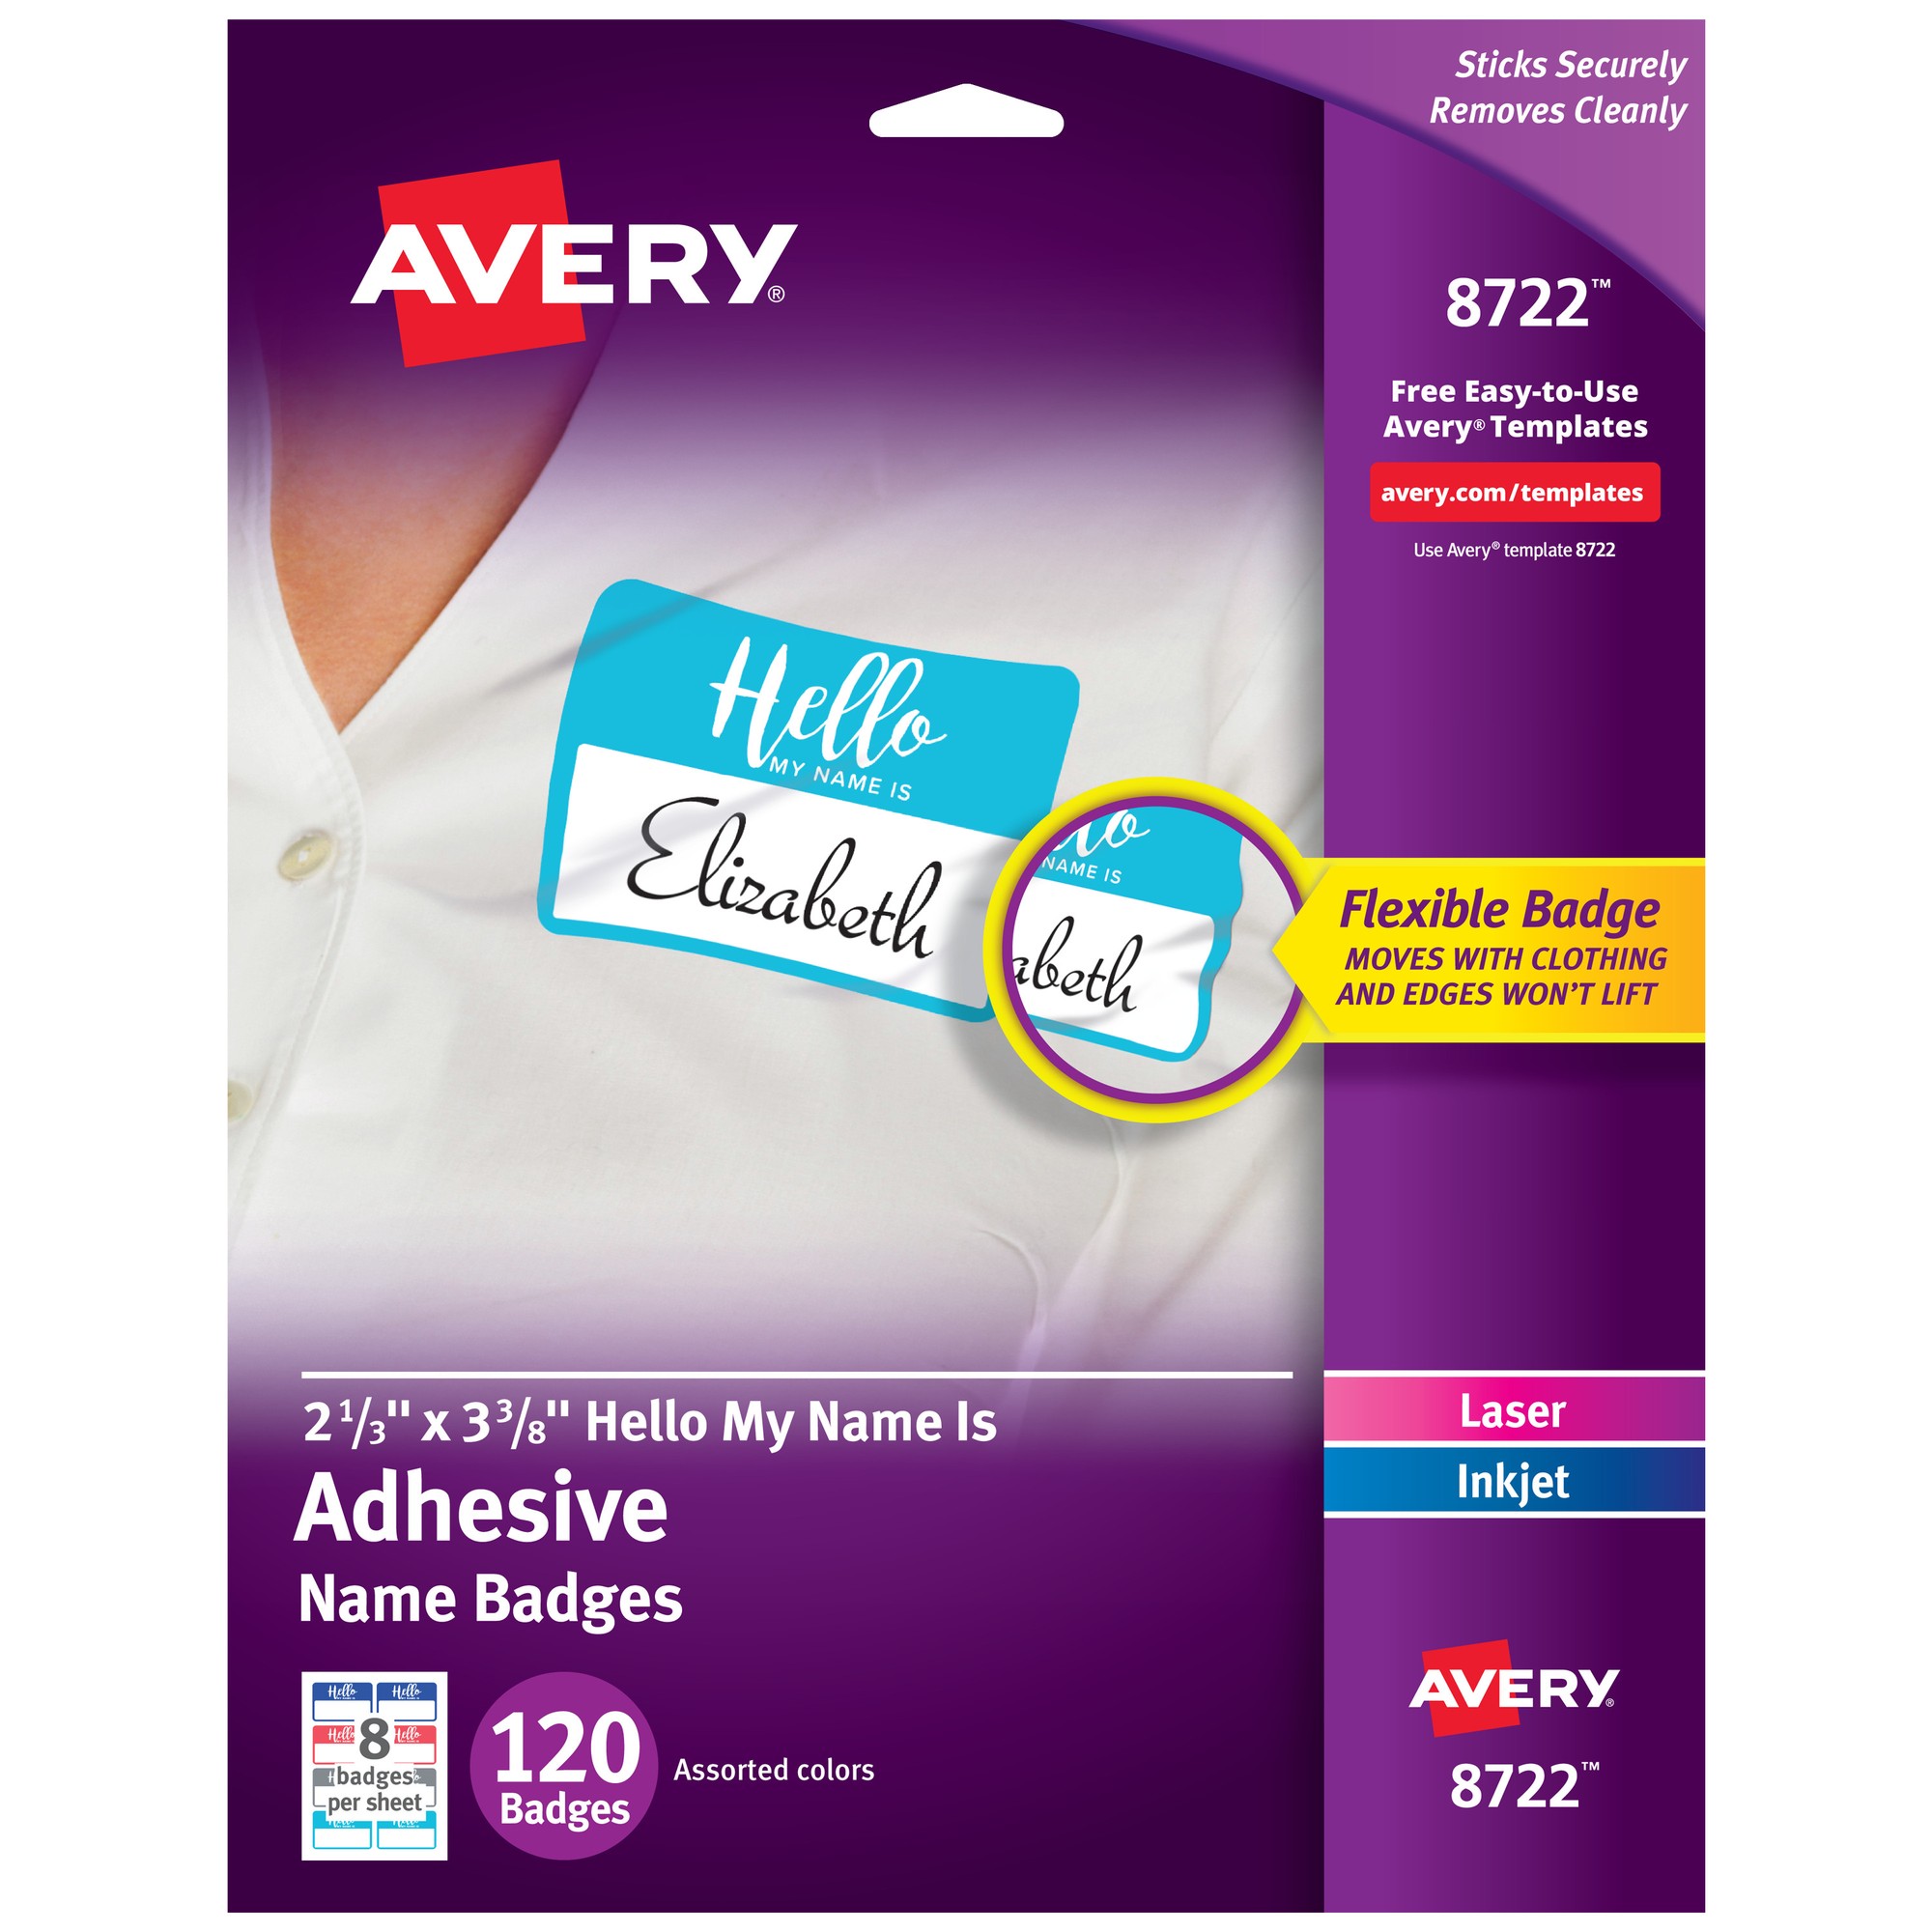 Avery Self-Adhesive Name Tags - "Hello My Name Is" - 11" Height x 8 1/2" Width - Removable Adhesive - Rectangle - Laser, In